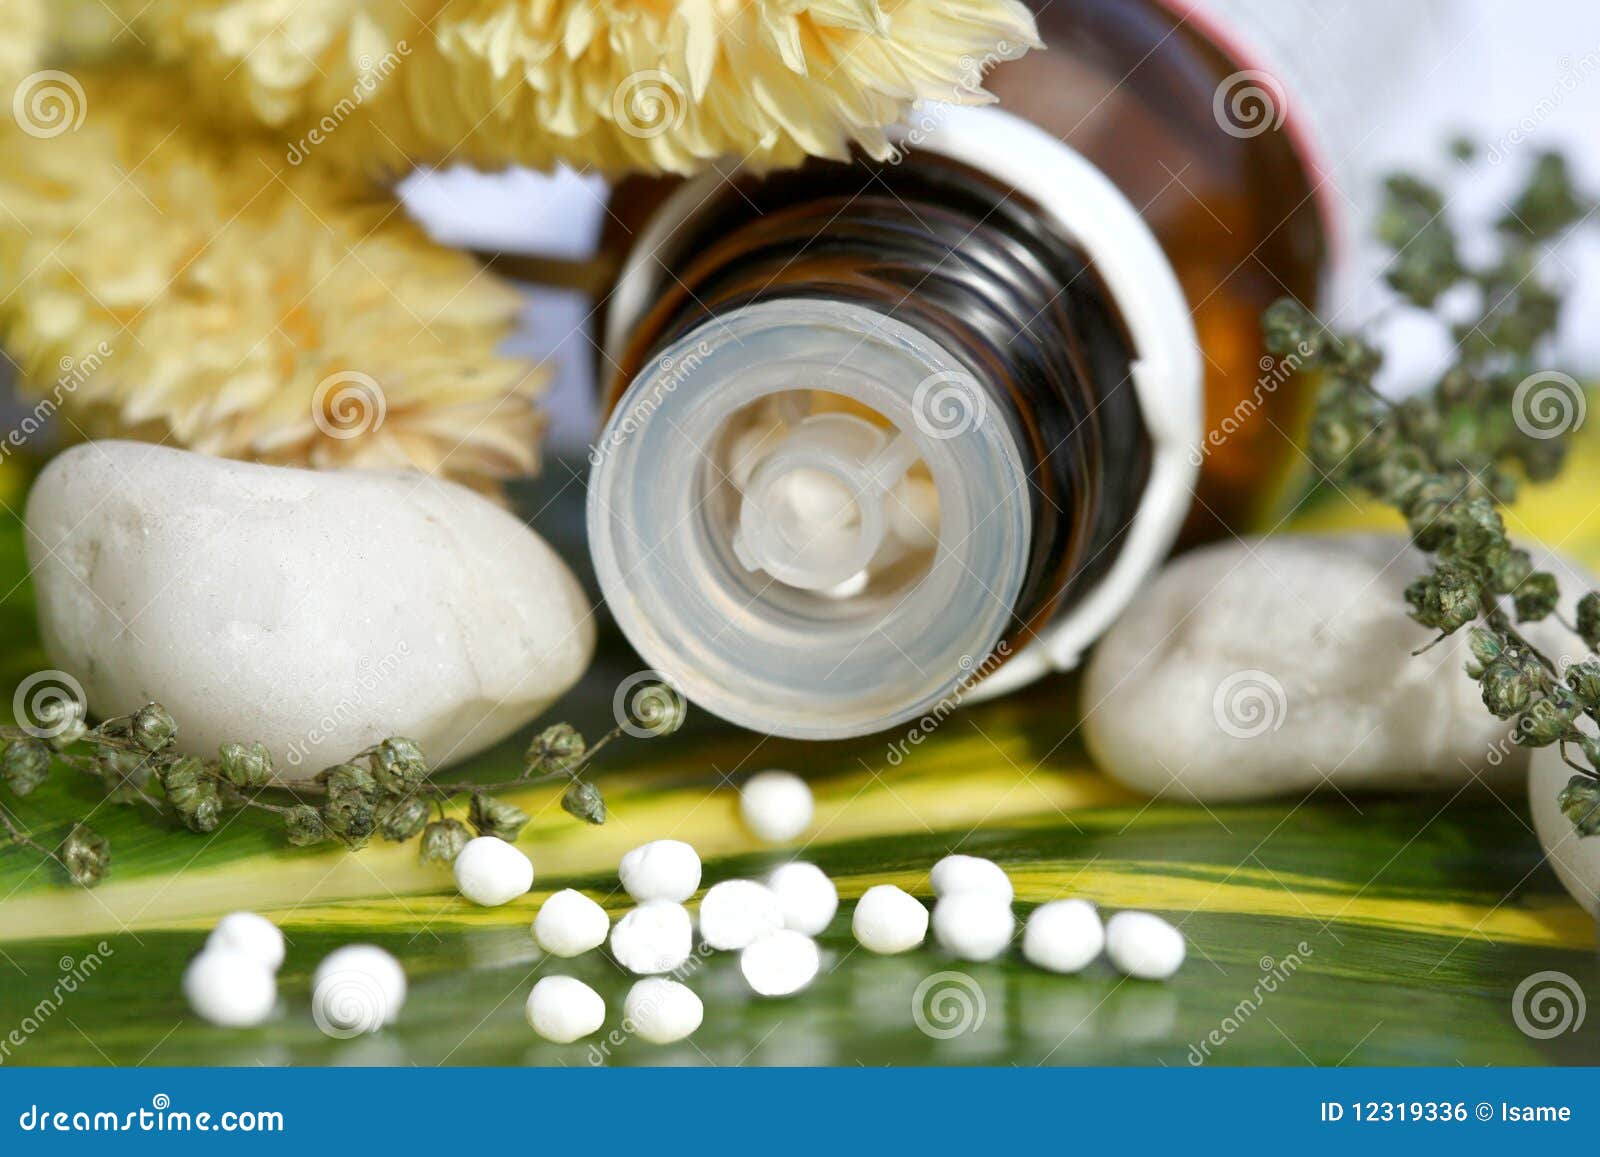 homeopathic pills over a green leaf